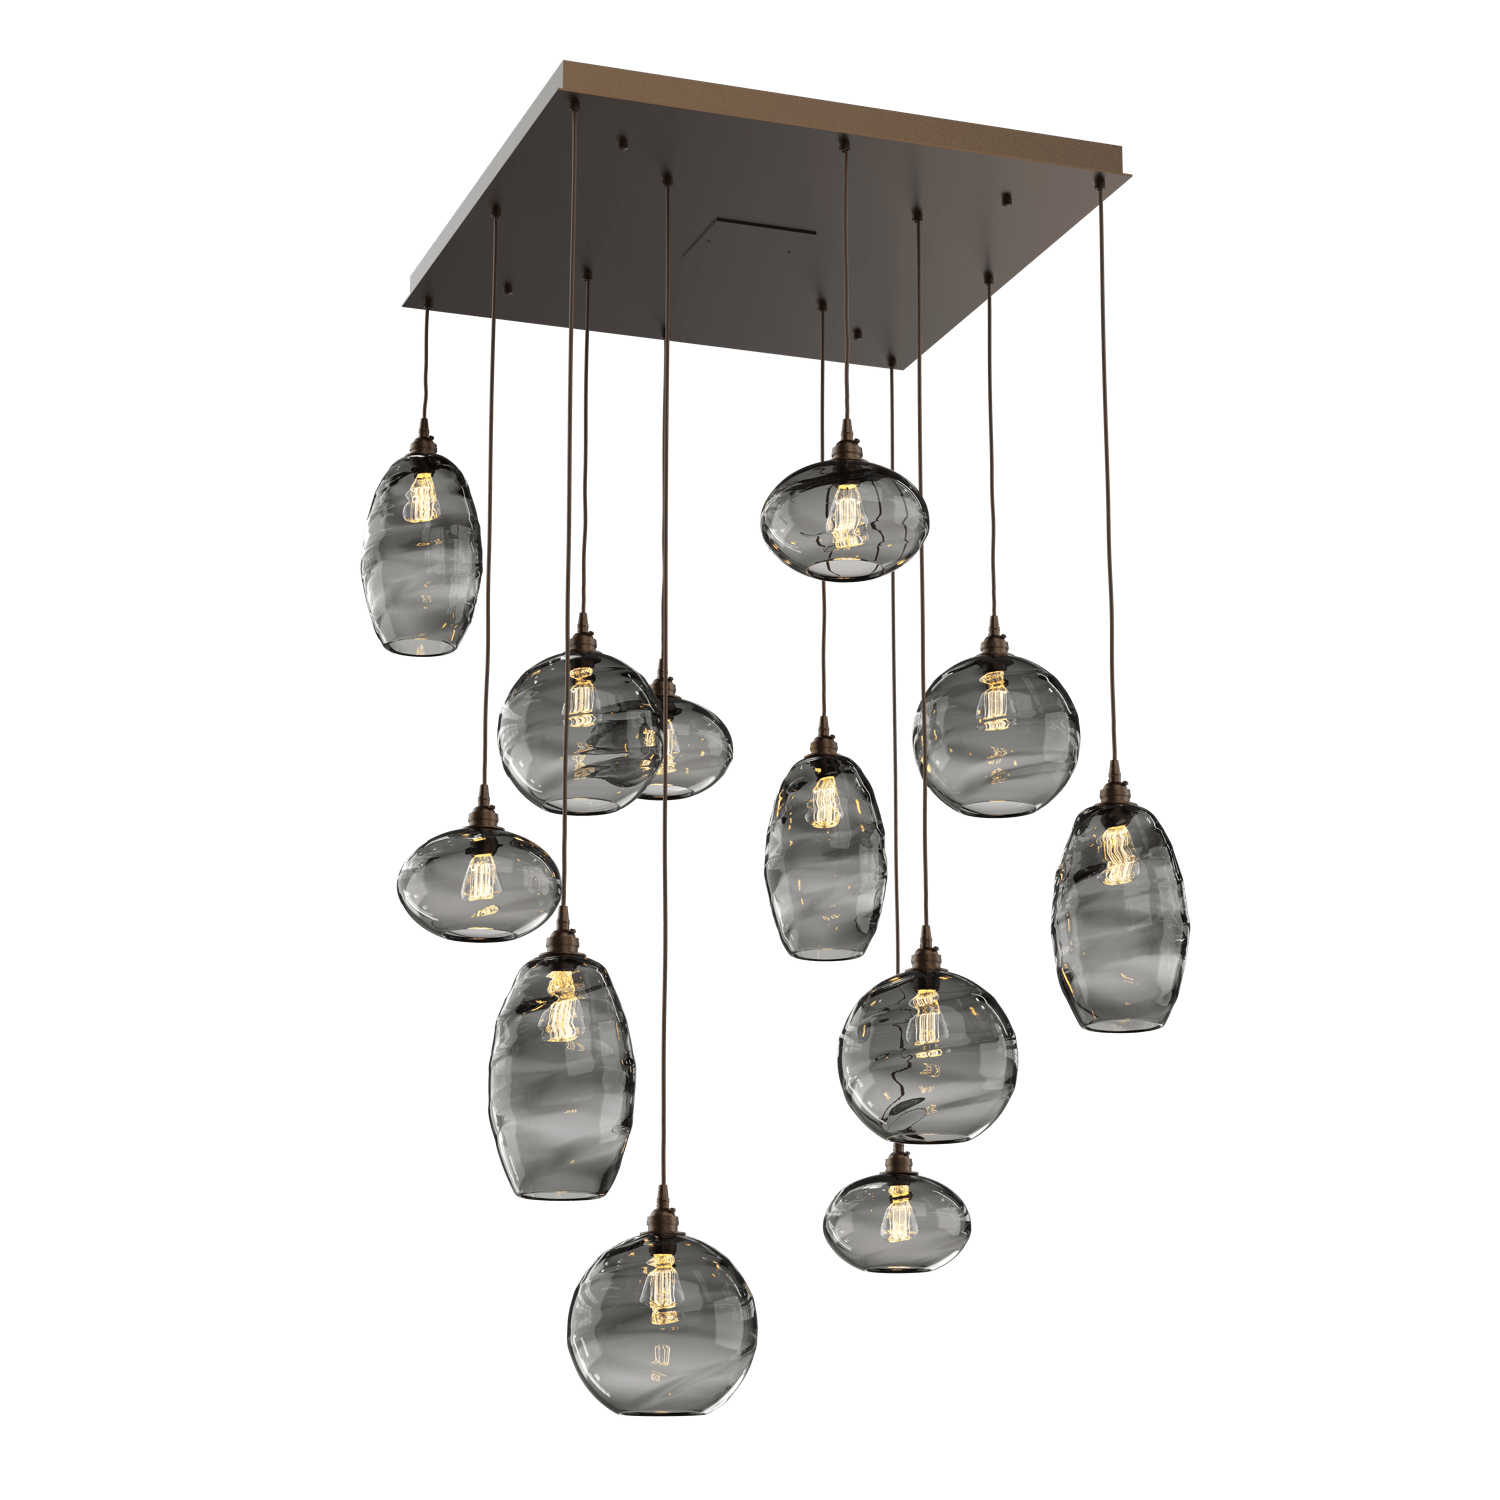 CHB0048-12-FB-OS-Hammerton-Studio-Optic-Blown-Glass-Misto-12-light-square-pendant-chandelier-with-flat-bronze-finish-and-optic-smoke-blown-glass-shades-and-incandescent-lamping